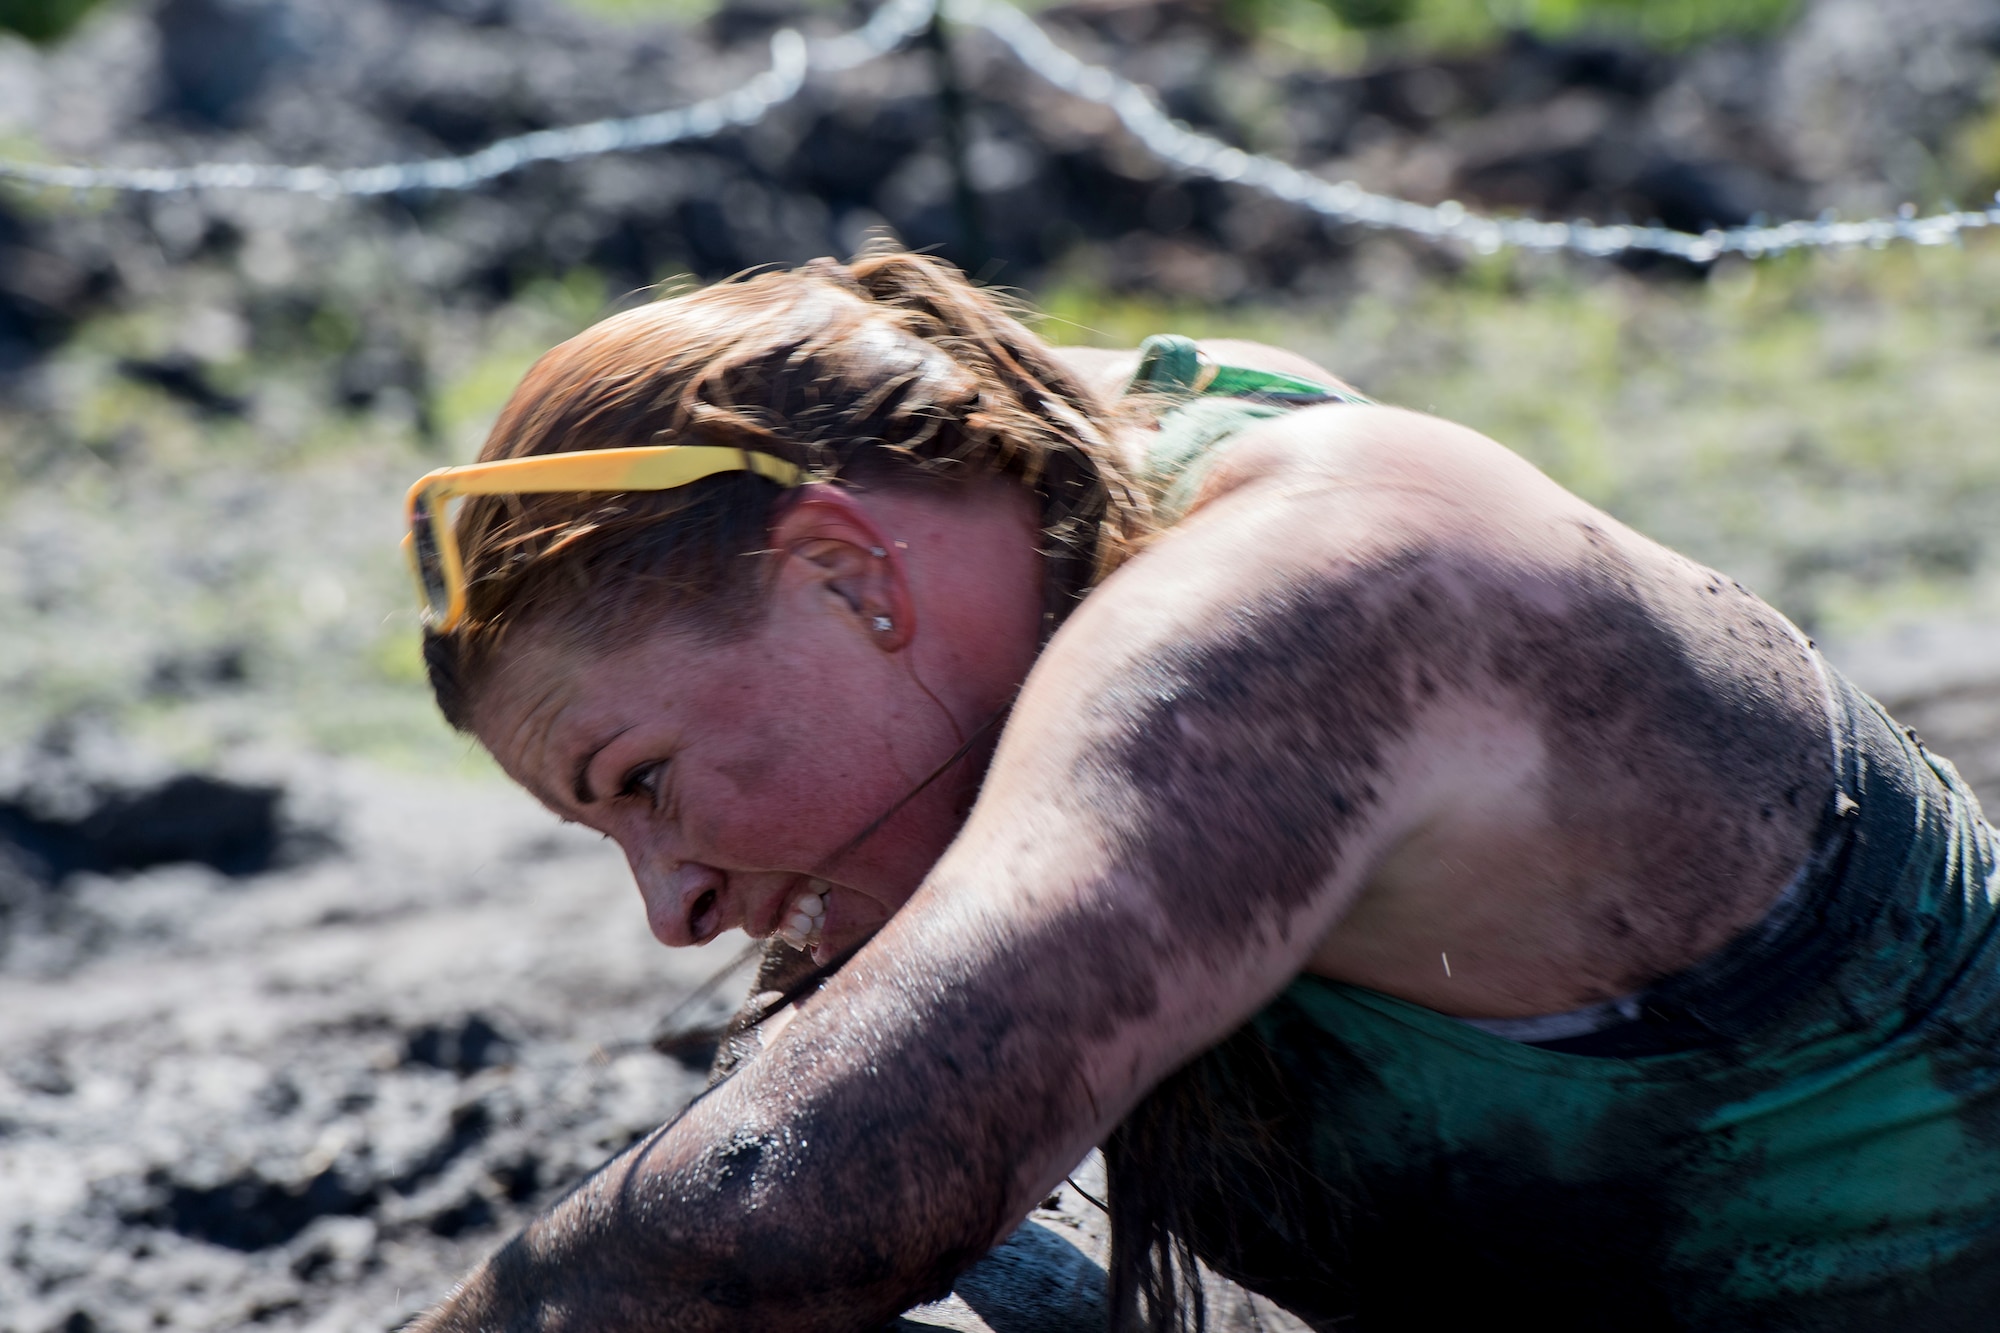 A Moody Mud Run participant pulls herself between a log and barbed wire, May 6, 2017, in Ray City, Ga. The Fourth Annual Moody Mud consisted of both adult and child course that challenged more than 600 participants with obstacles over 4.2 miles. (U.S. Air Force photo by Staff Sgt. Eric Summers Jr.)